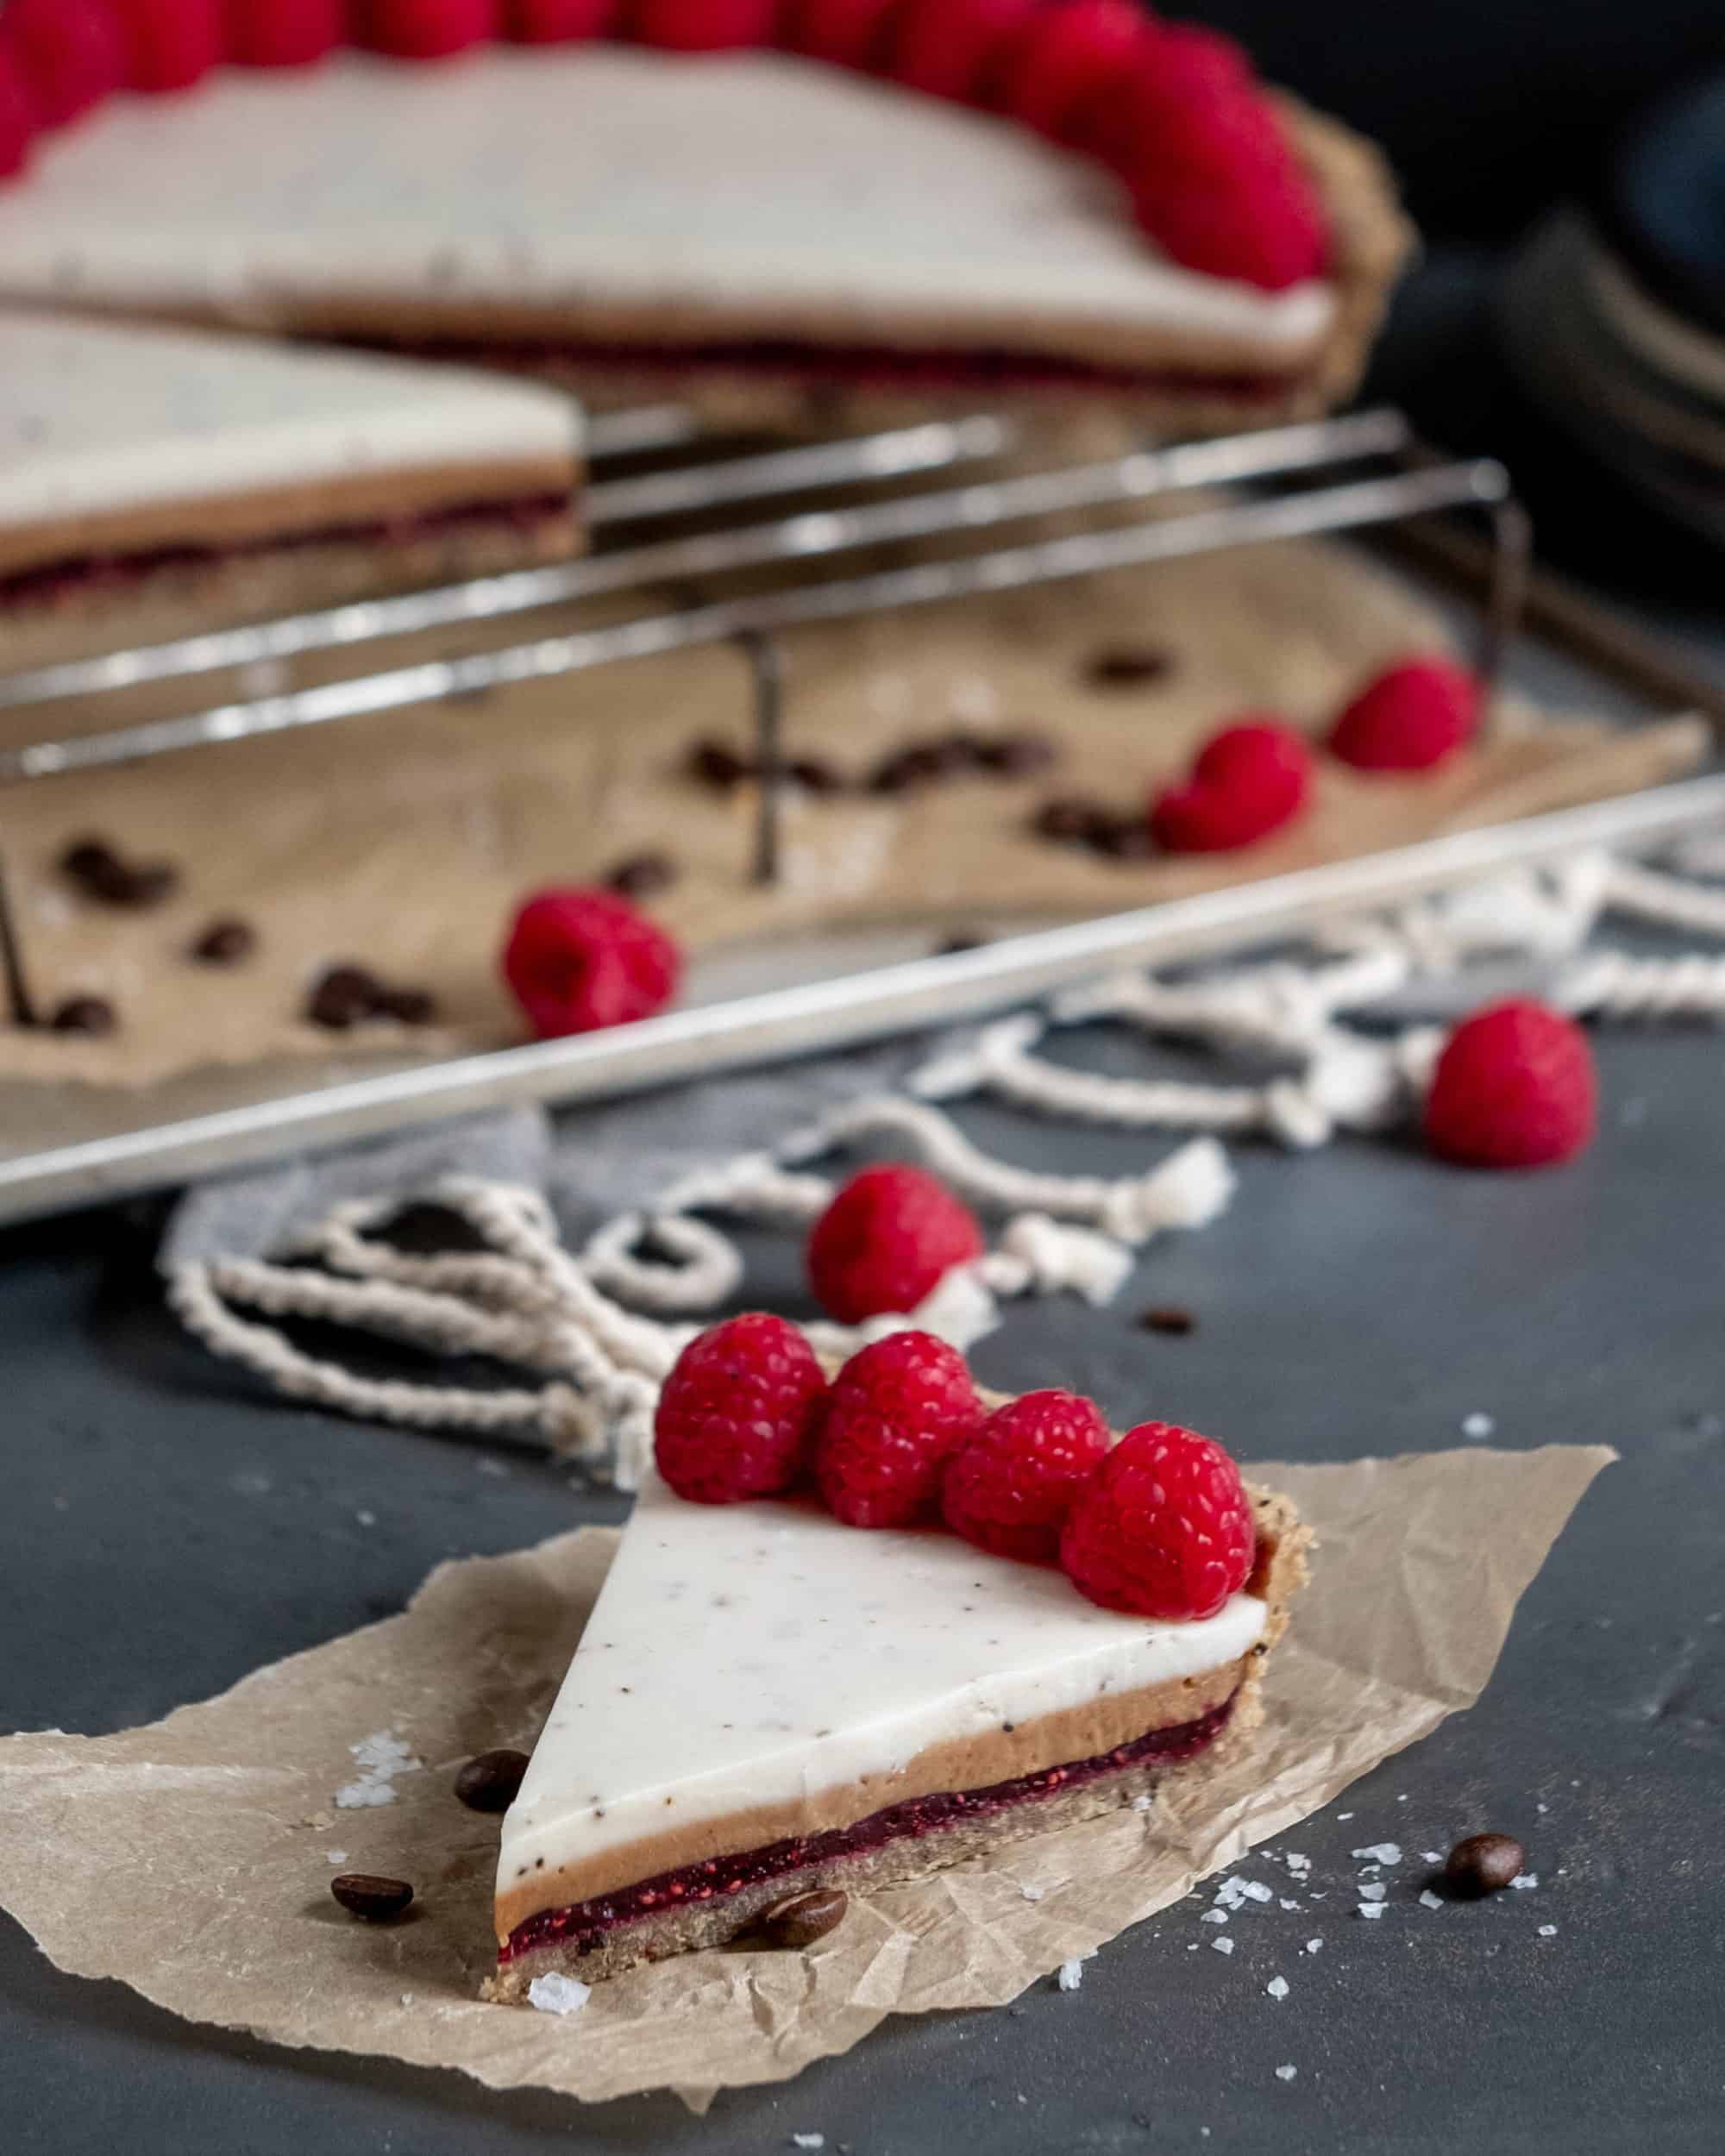 Salted Caramel Tart with Raspberry and Coffee - Amy Levin